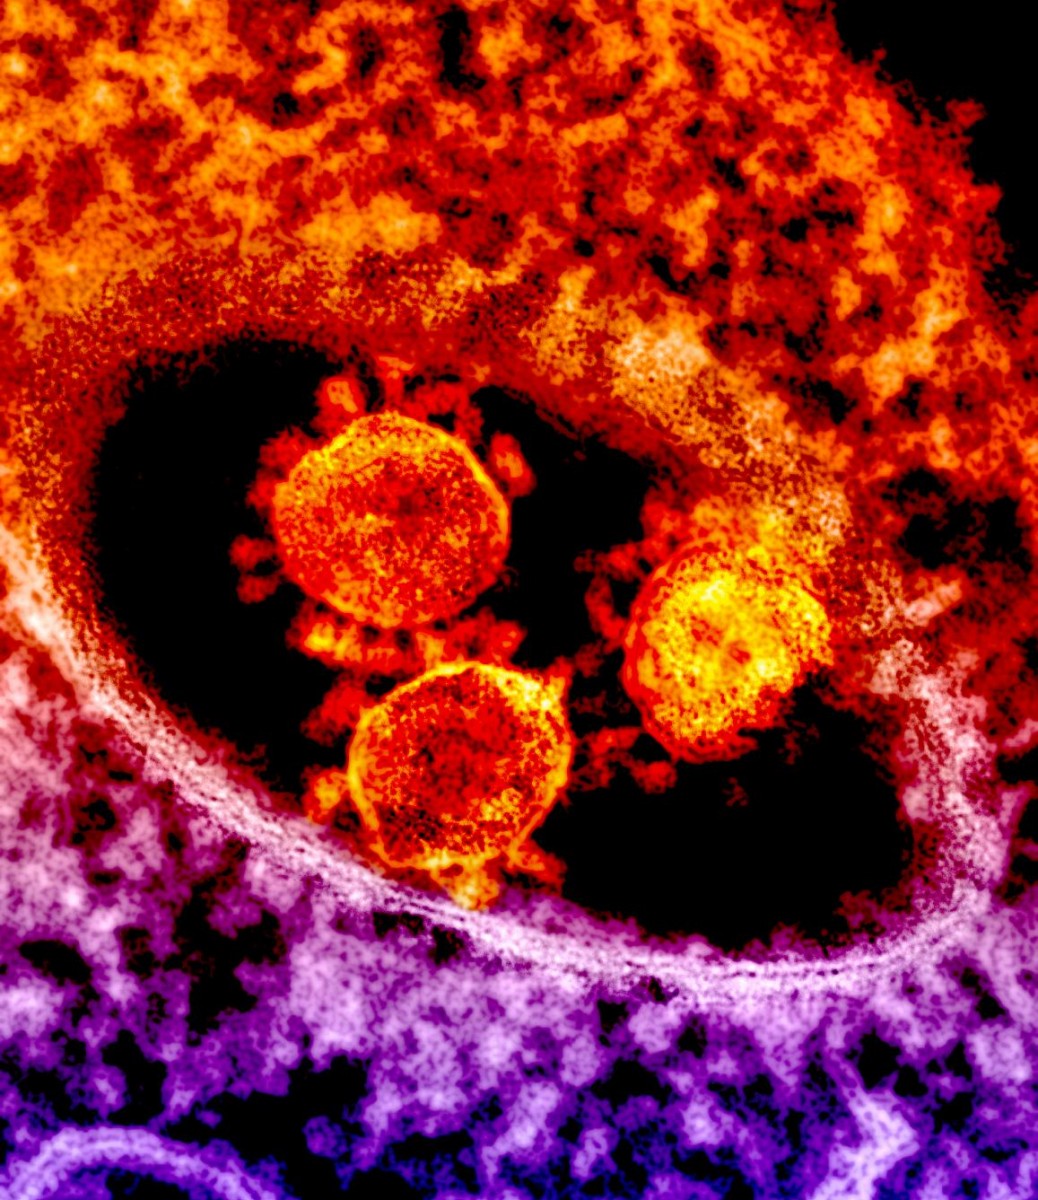 The round, spiked objects at center are MERS coronavirus particles.